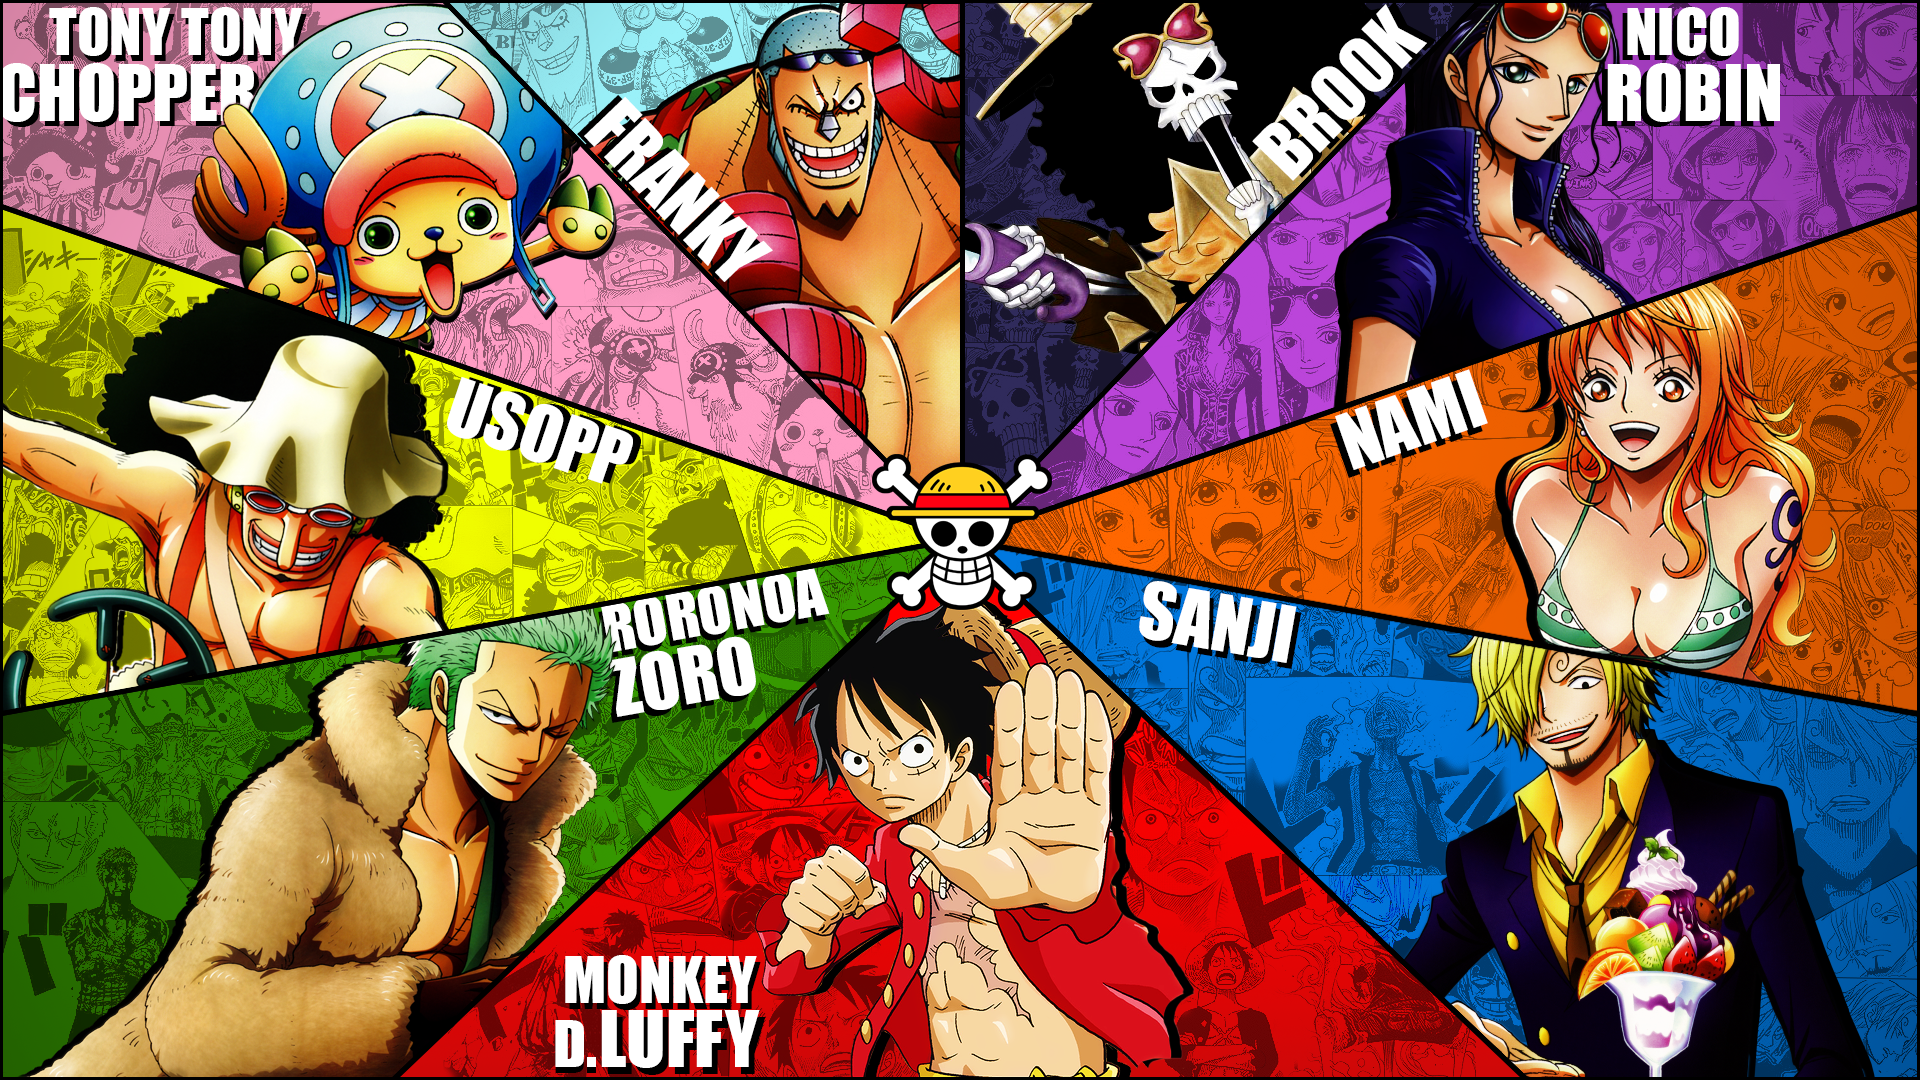 One Piece Mugiwaras wallpaper full hd 1080p by Marcos Inu on 1920x1080